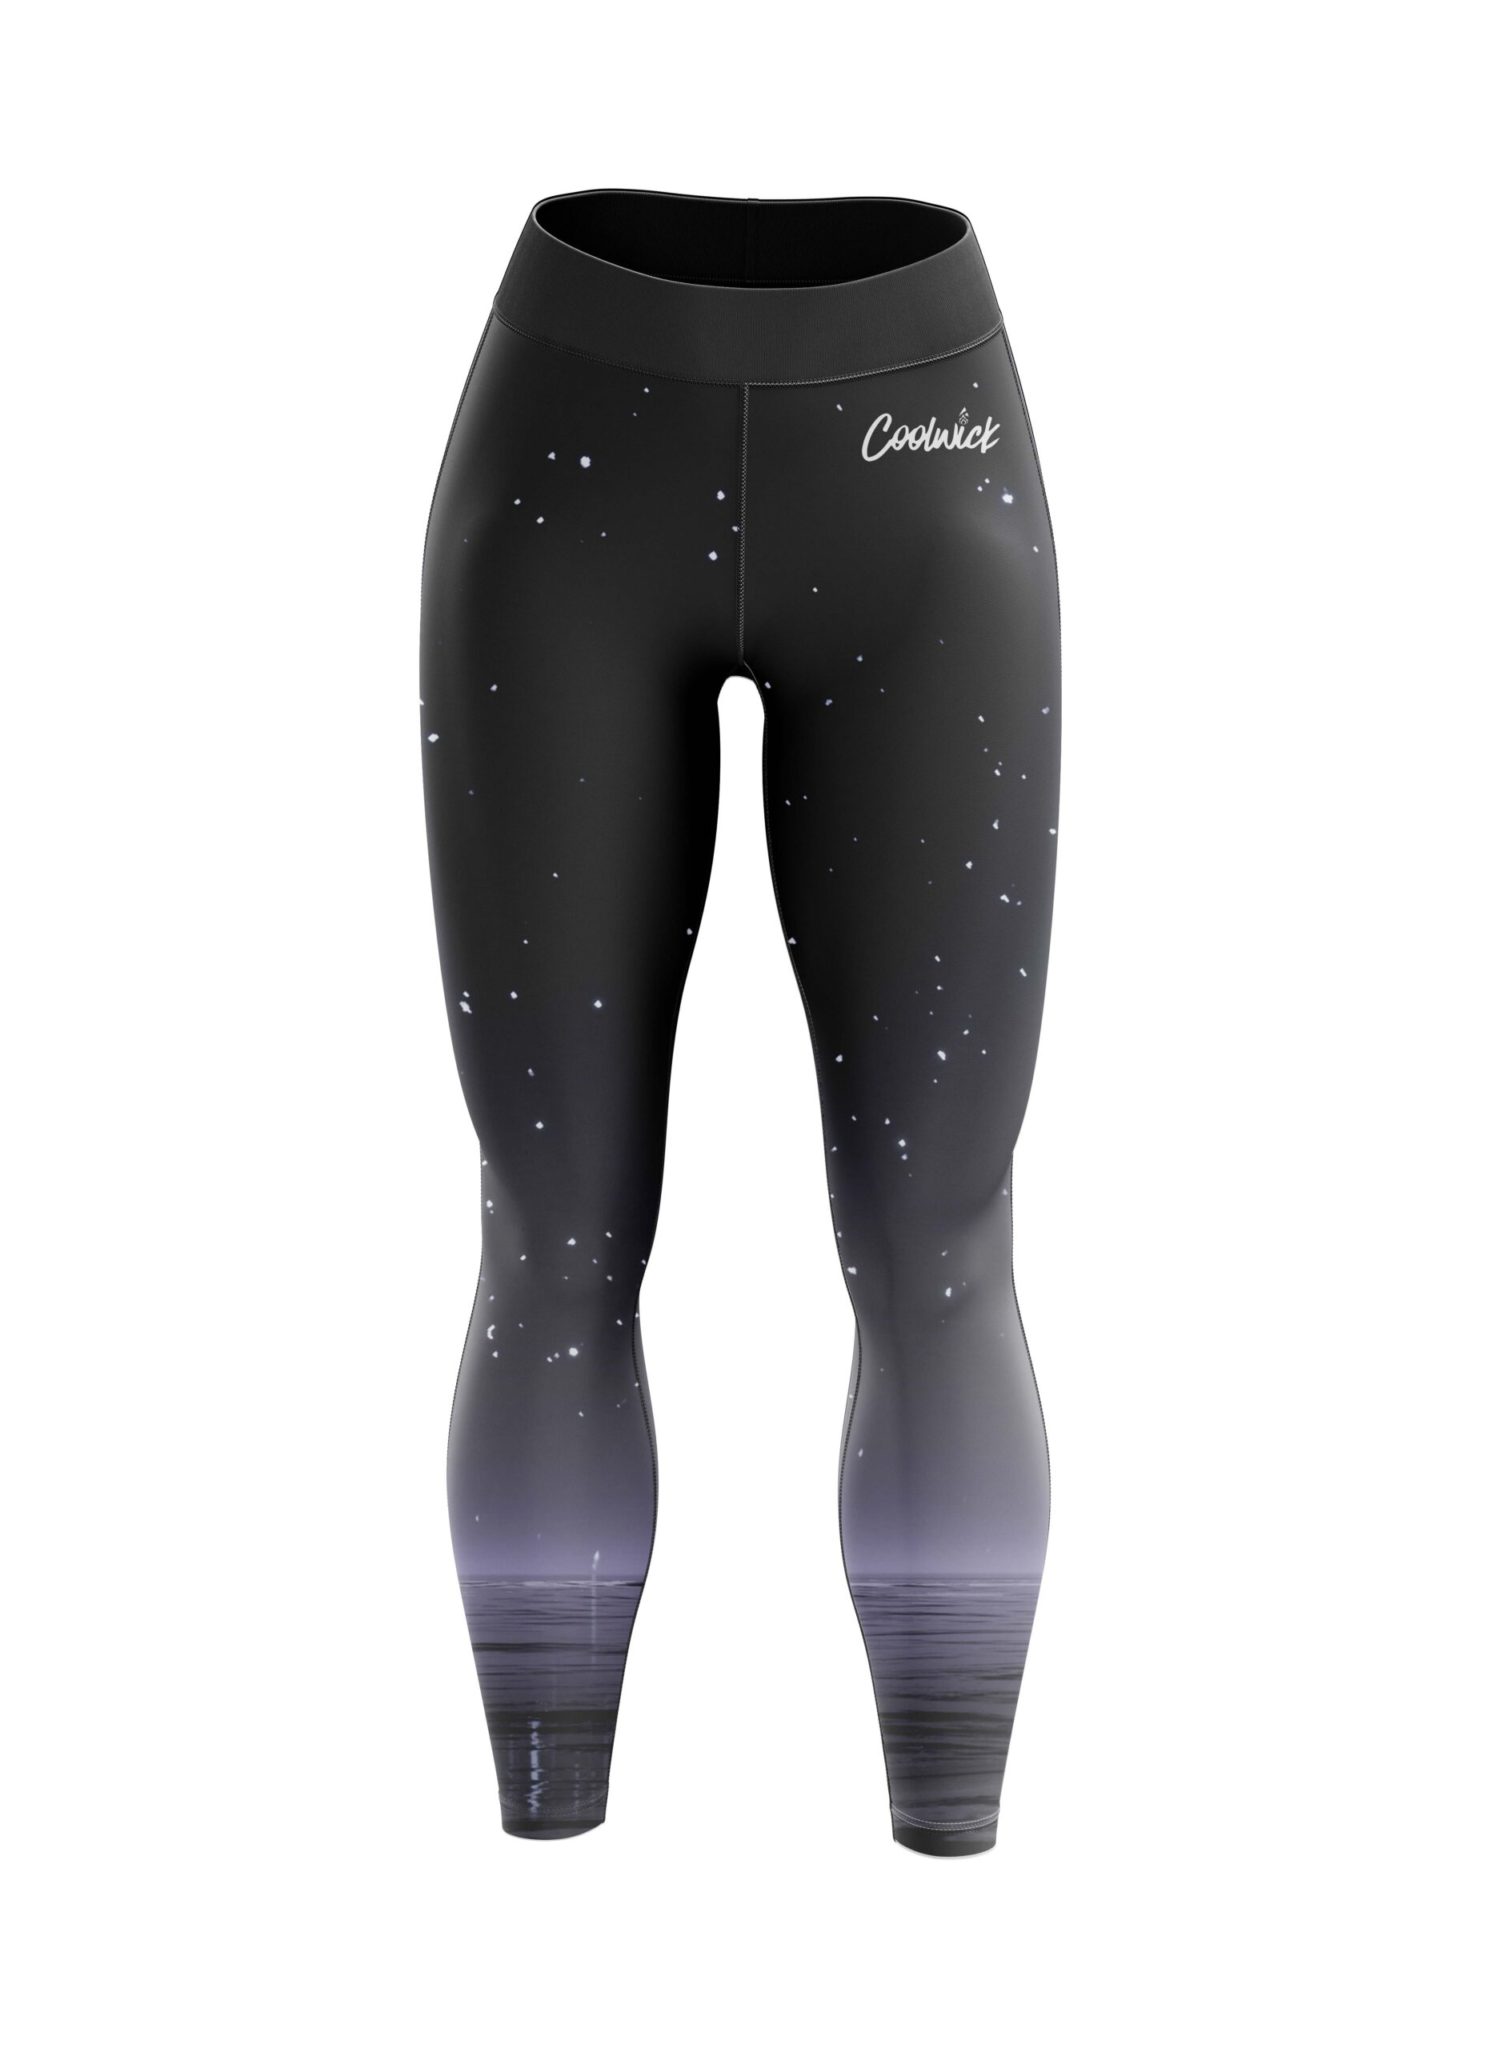 Starry Night CoolWick Leggings - Coolwick Bowling Apparel